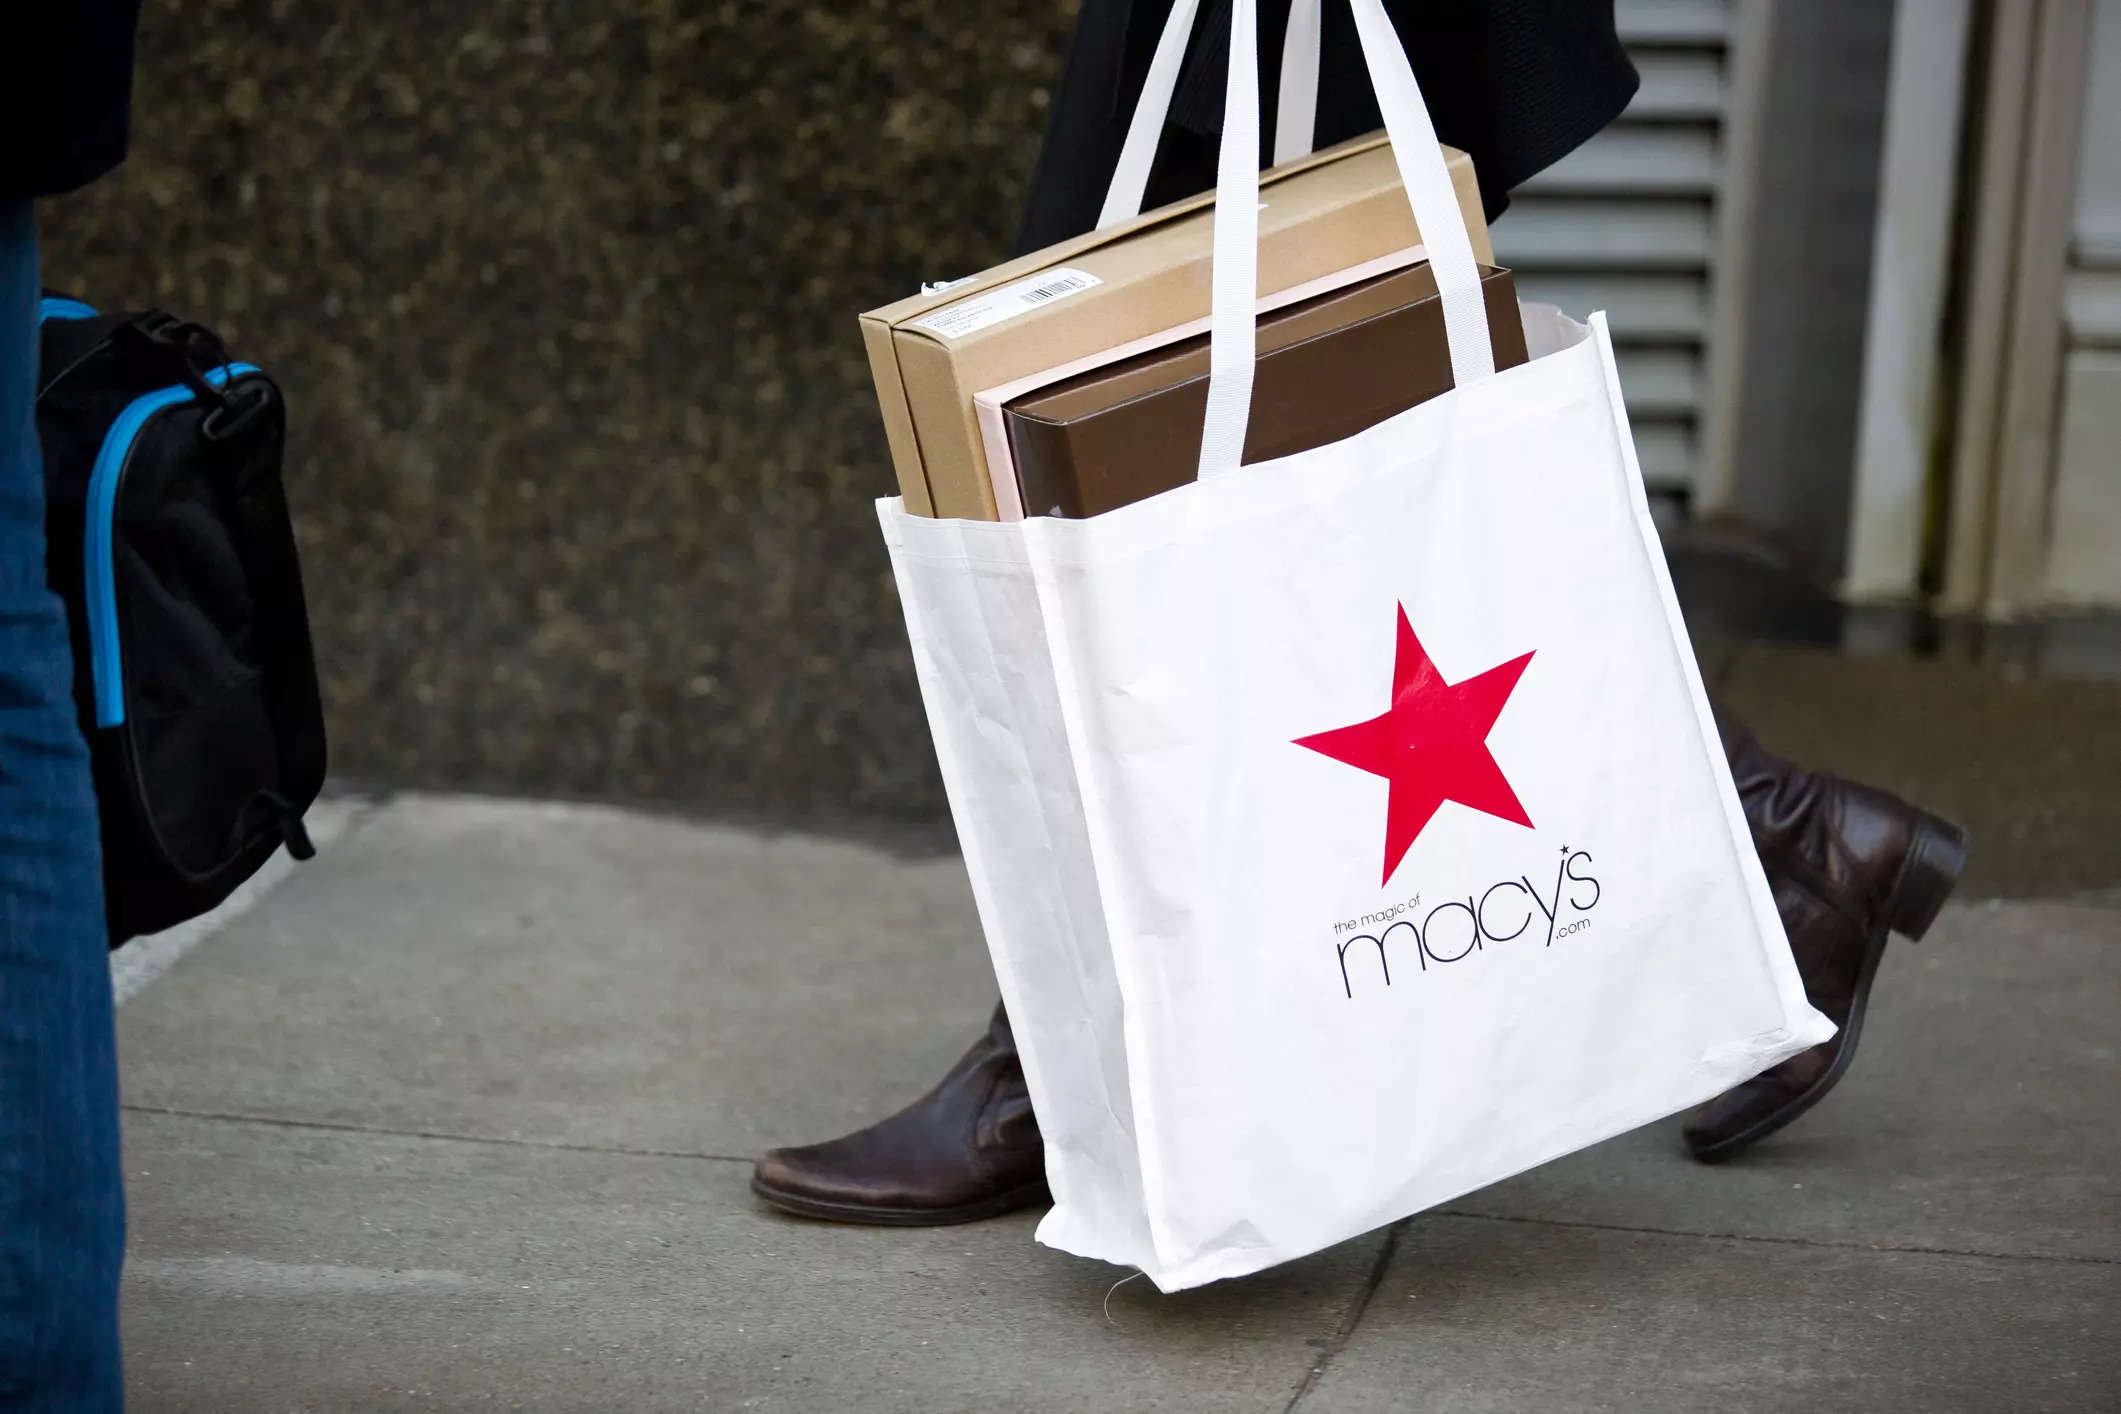 Macy's warns of discounts hitting annual profit as inflation saps demand